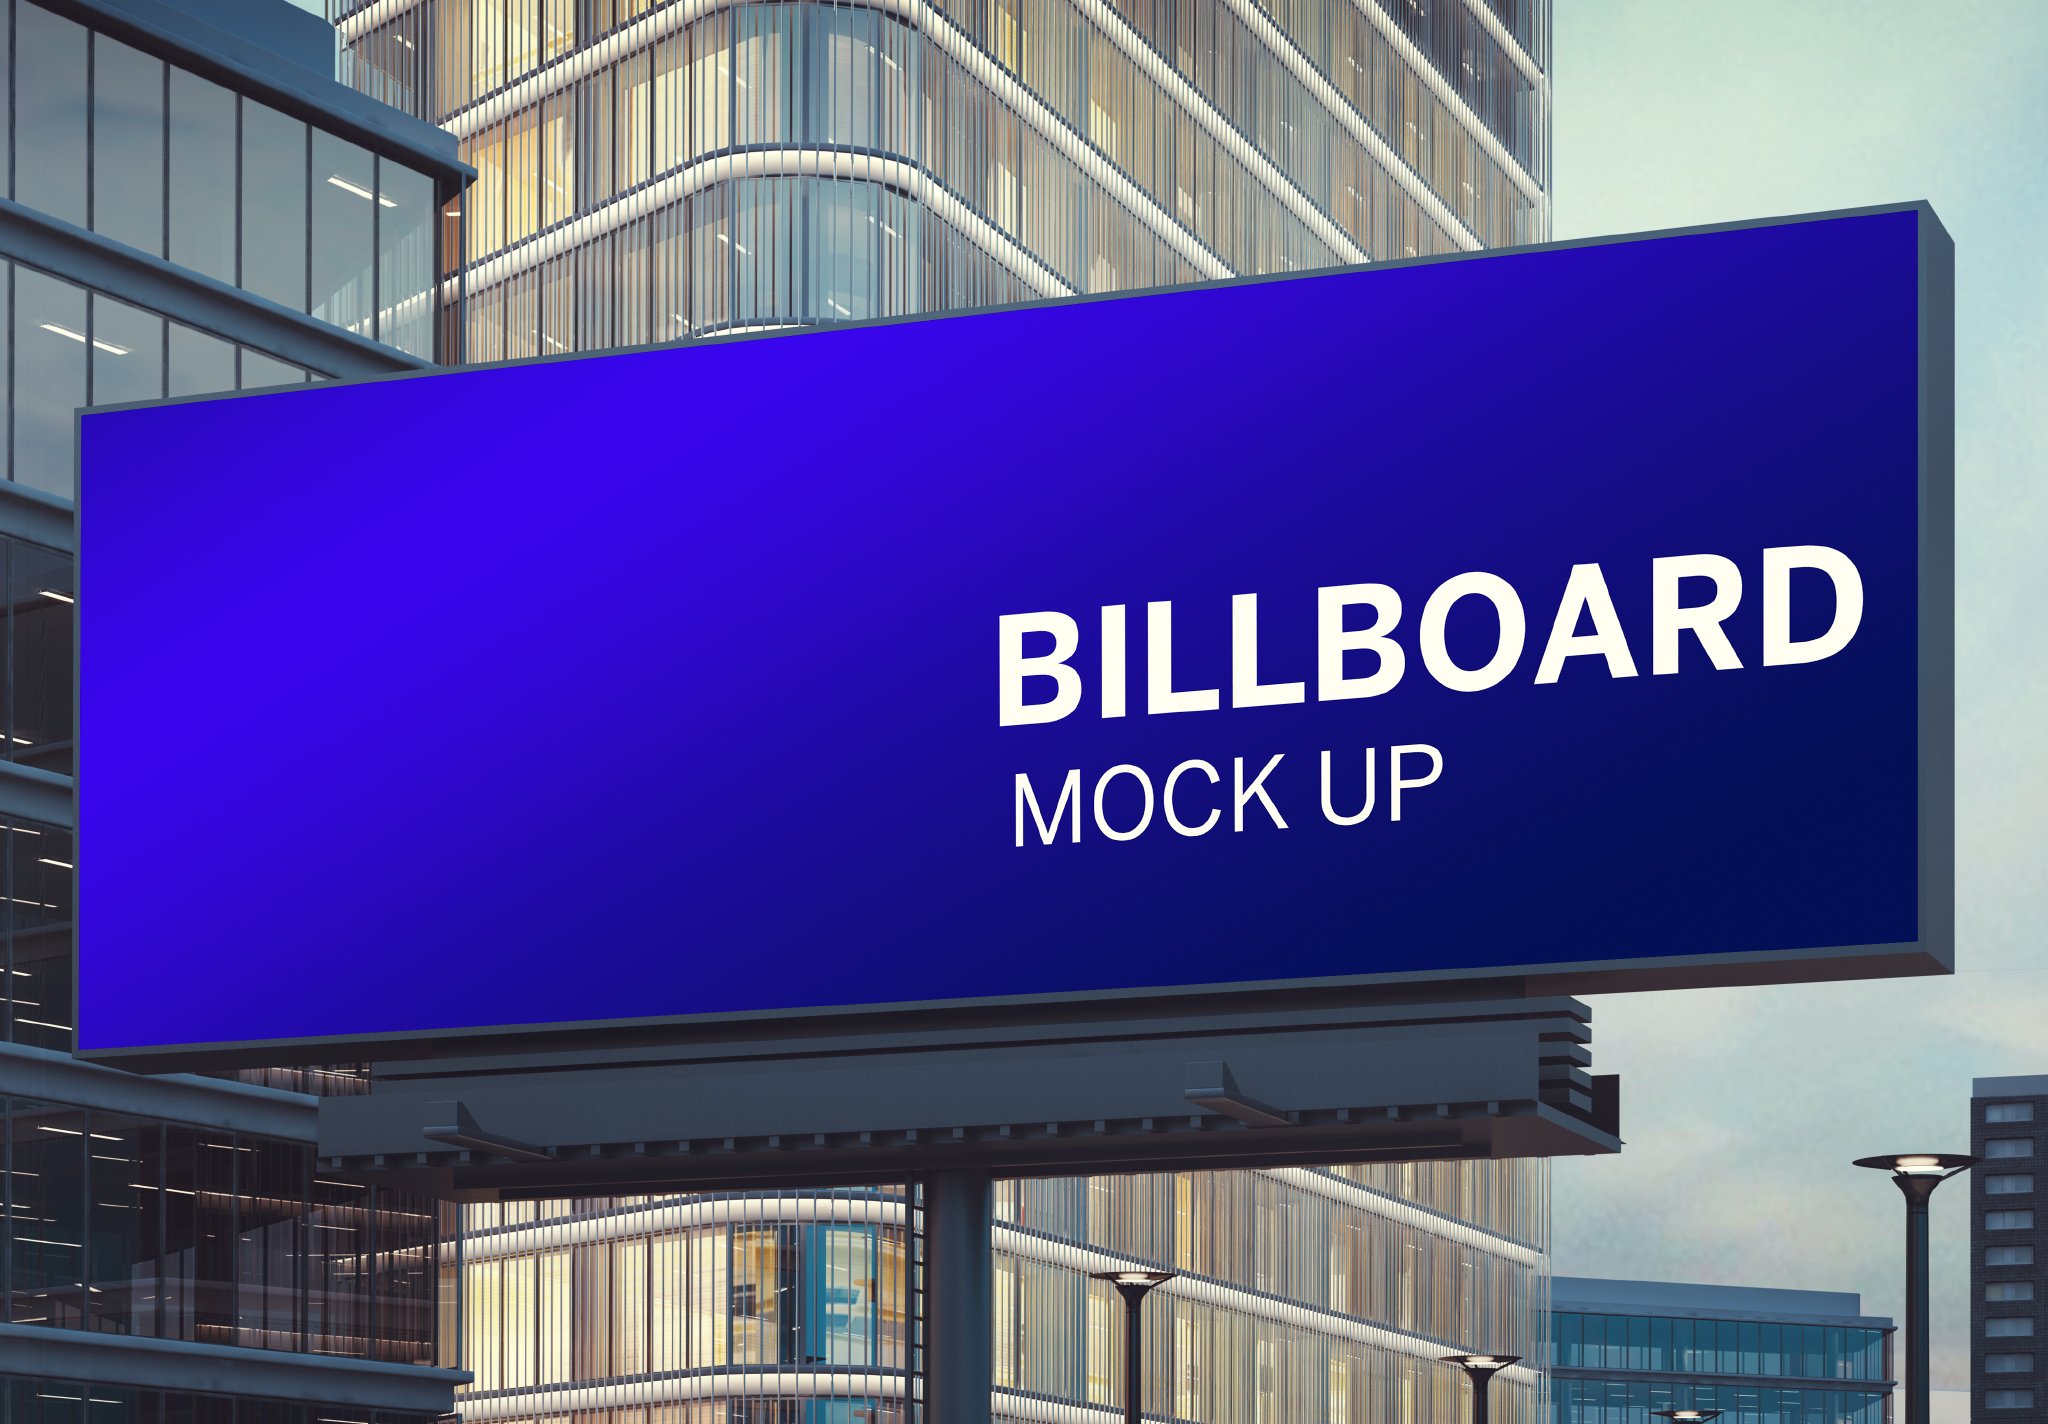 Large Horizontal Billboard in City cover image.